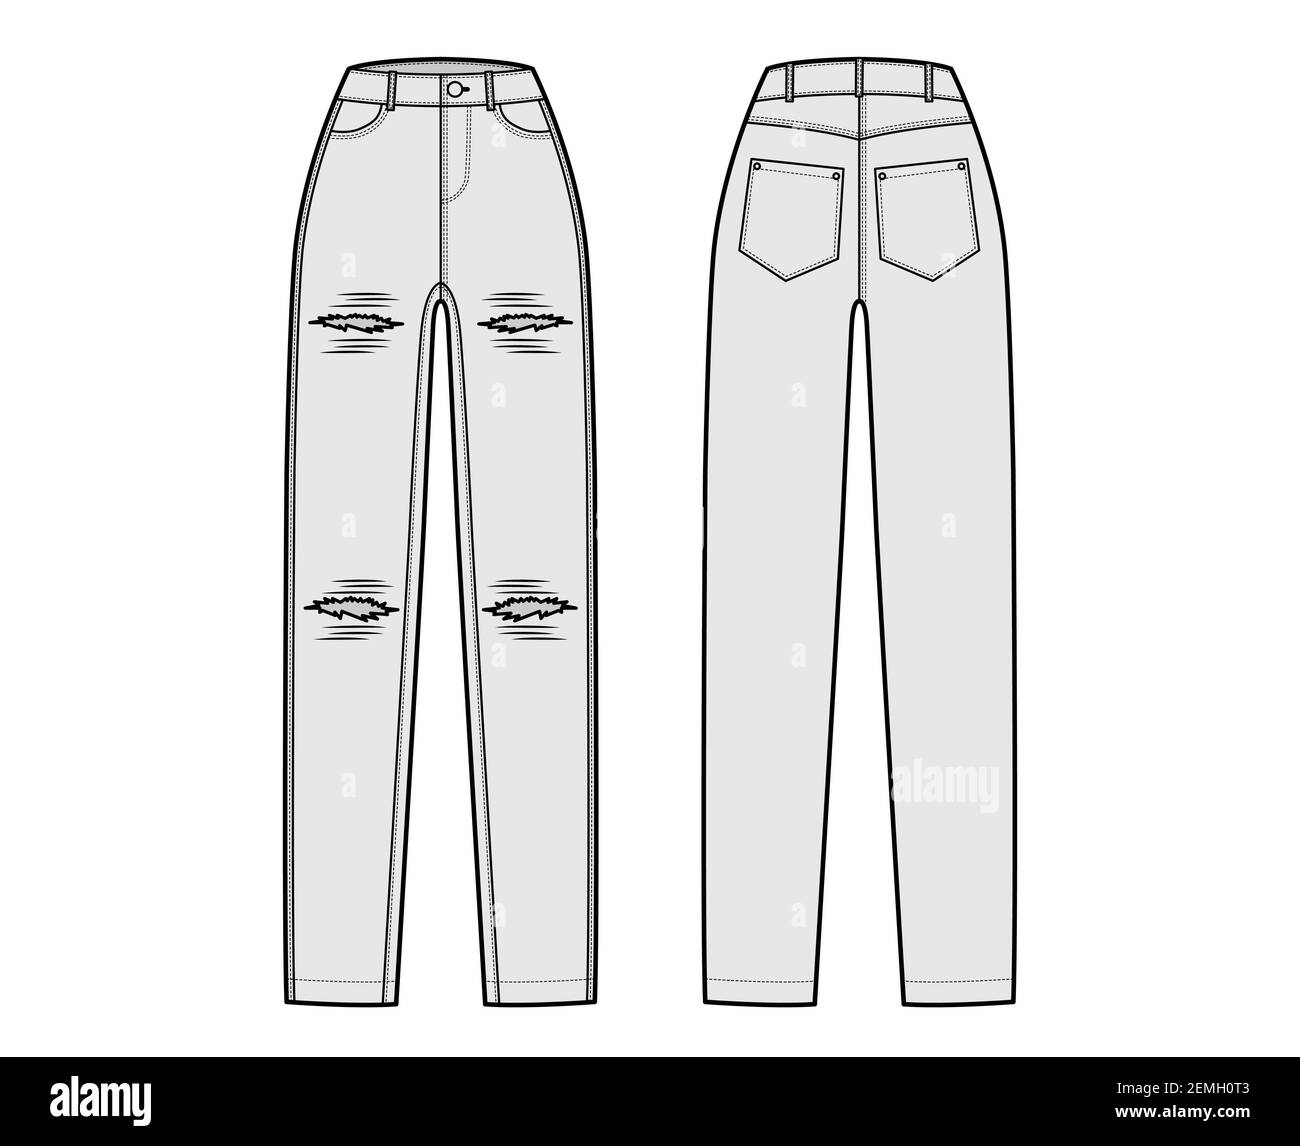 Baggy Jeans Denim pants technical fashion illustration with full length,  normal waist, high rise, 5 pockets